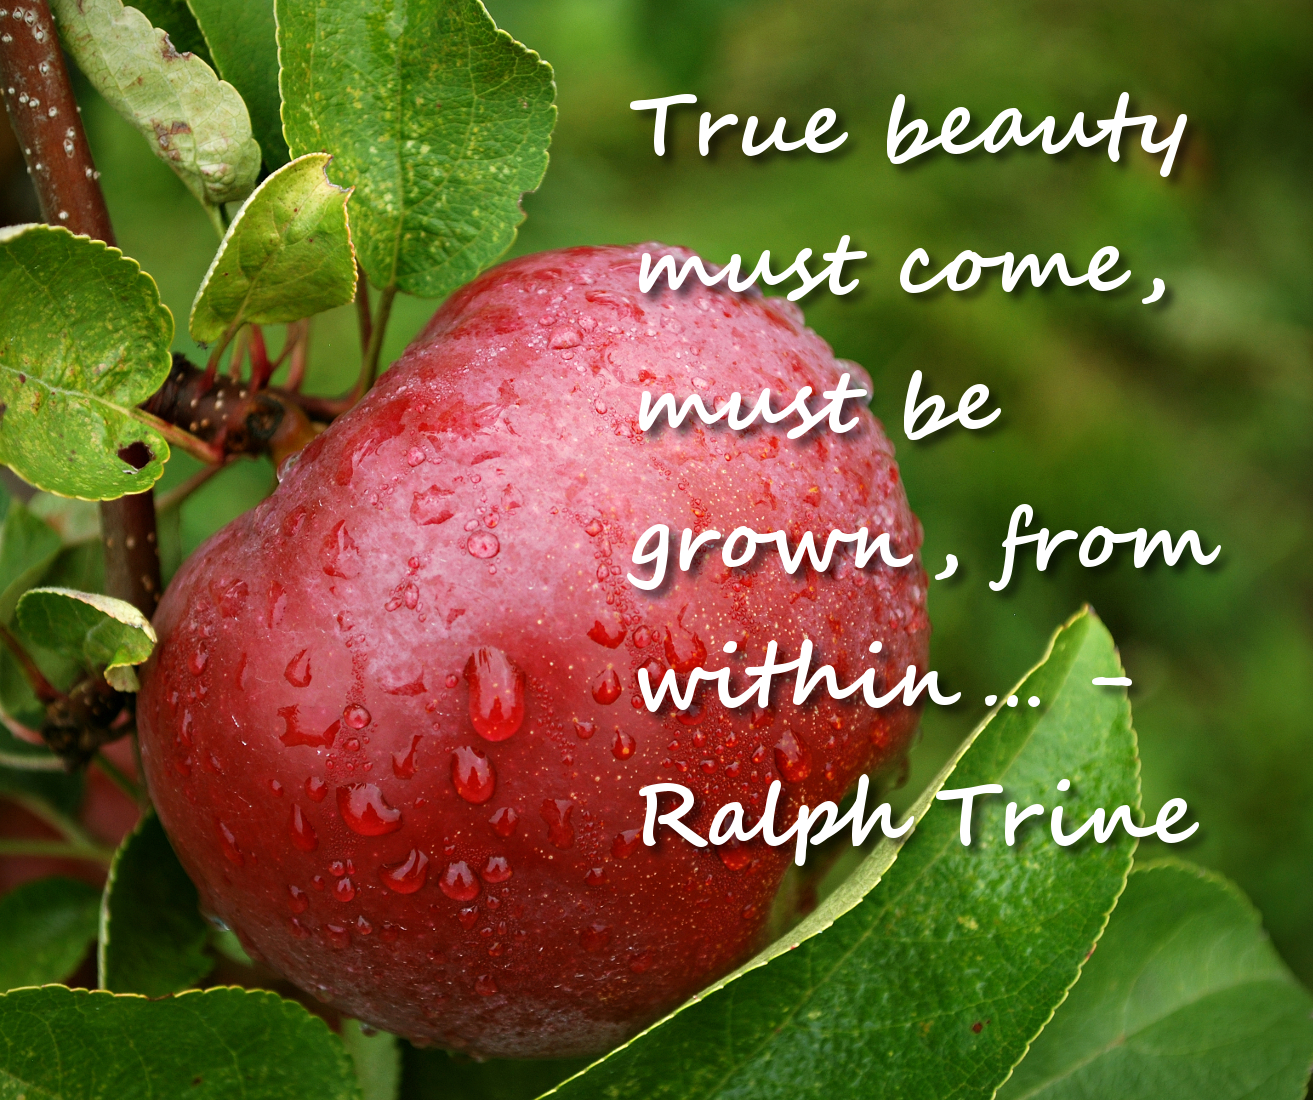 When Beauty Comes From Within - "I Take Off The Mask!" - Quotes, Poems